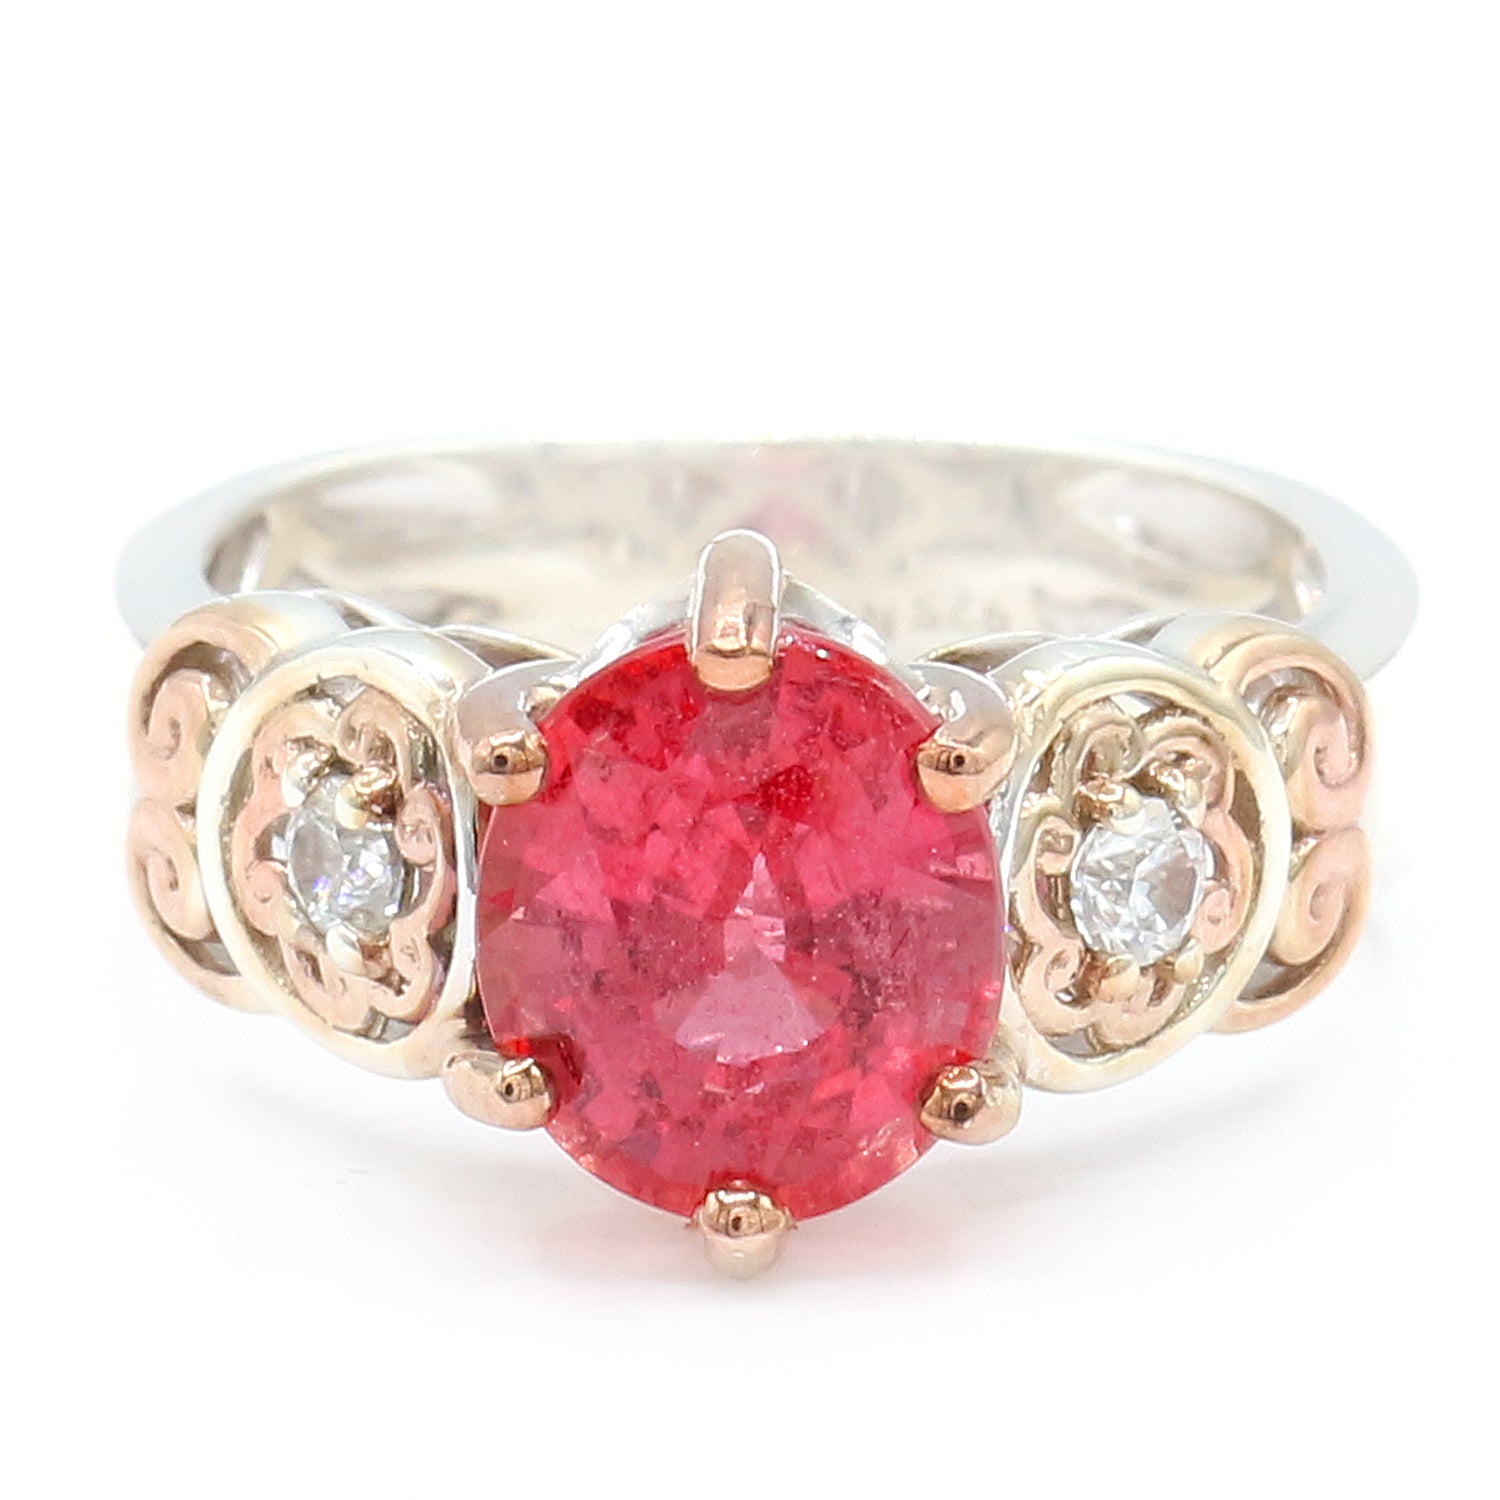 Limited Edition Gems en Vogue Luxe, One-of-a-Kind 3.41ctw Padparadscha Sapphire & White Zircon Ring